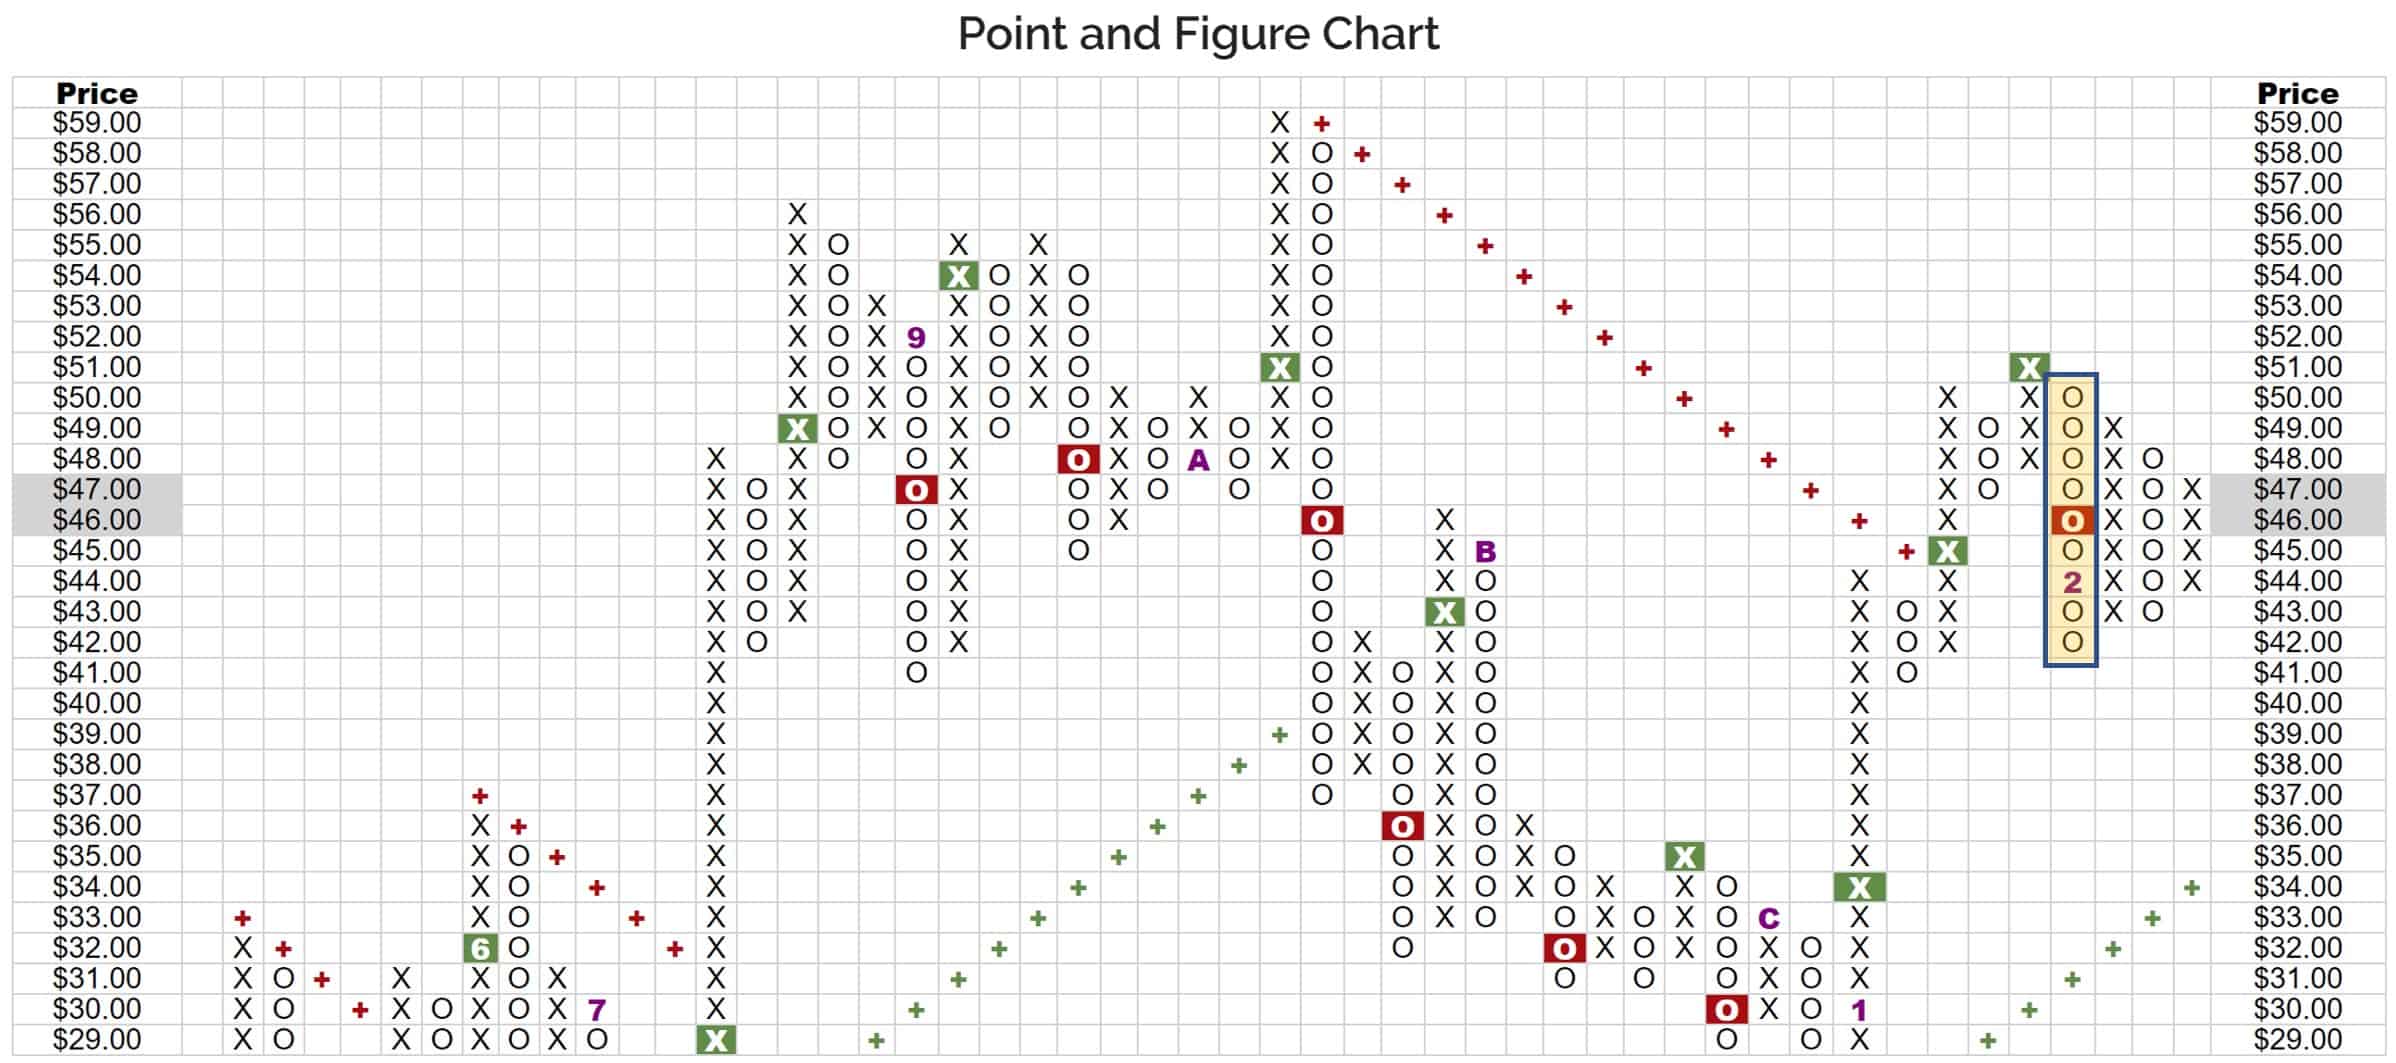 Point and figure charts for forex georgia state archives virtual vault forex